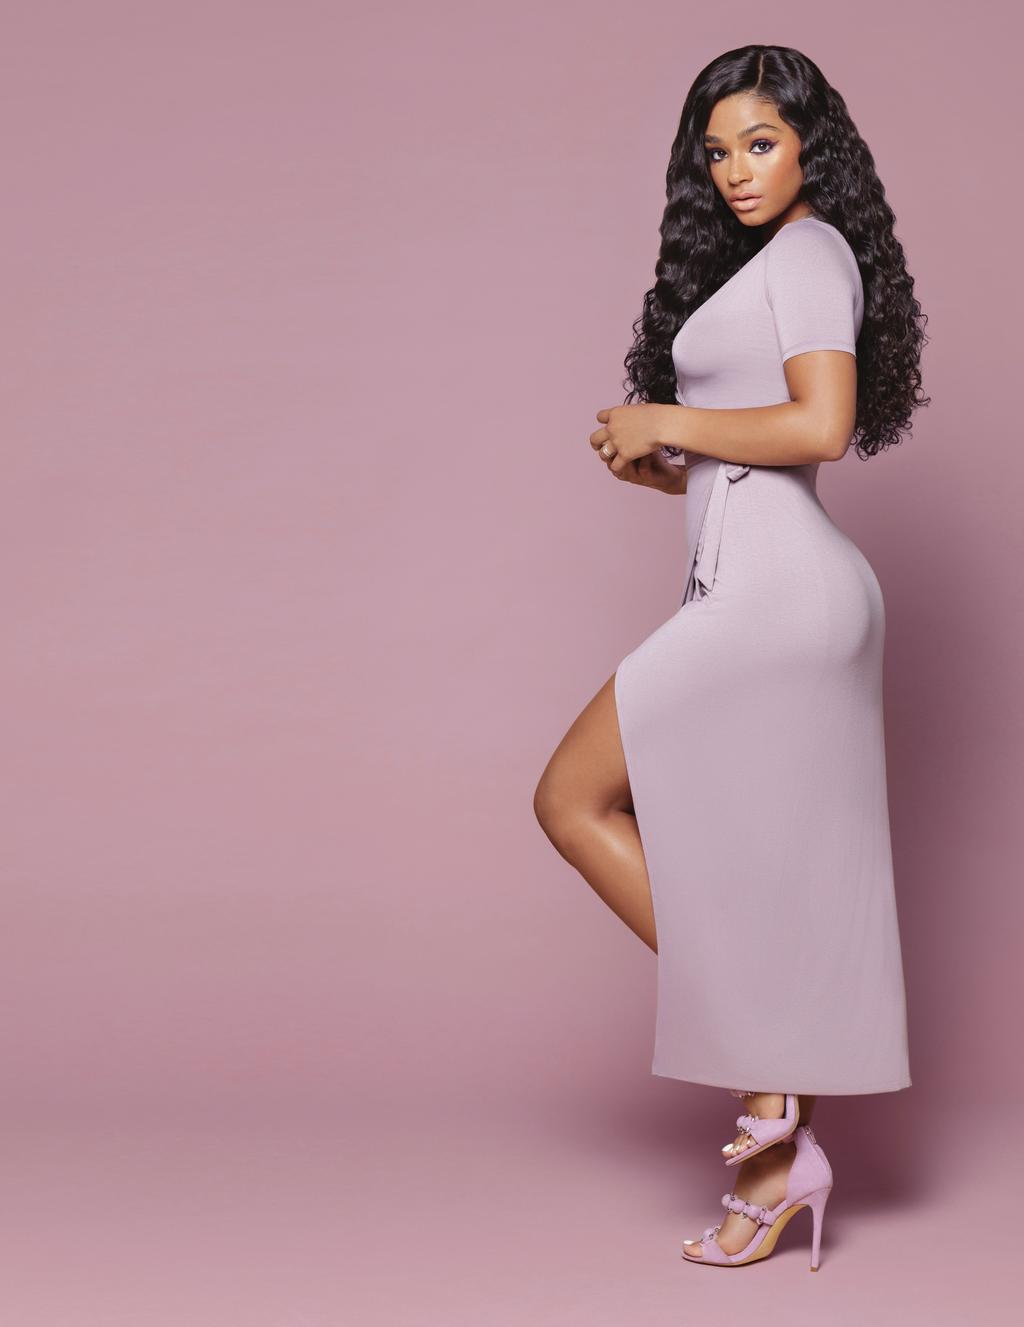 Enjoy the ease of a complete unit with Indique s PURE Curly Lace Front Wig. This summer pull out all the stops! Have your stylist customize and create the perfect look for you.